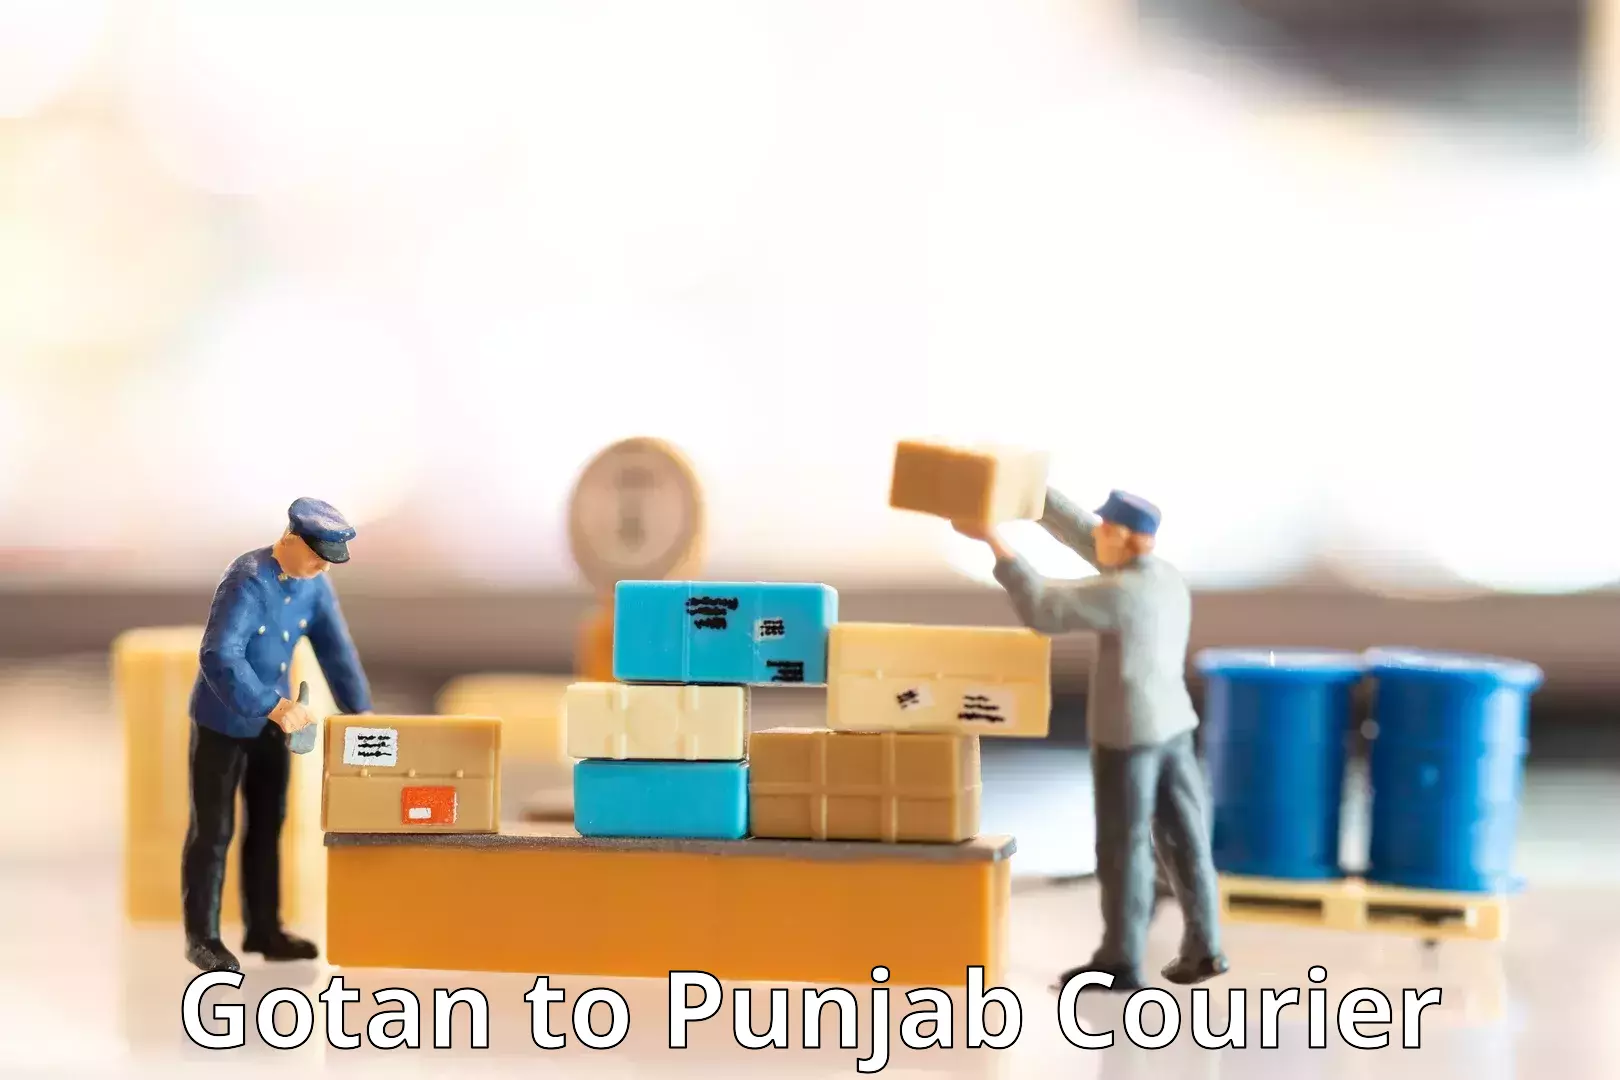 Package delivery network Gotan to Punjab